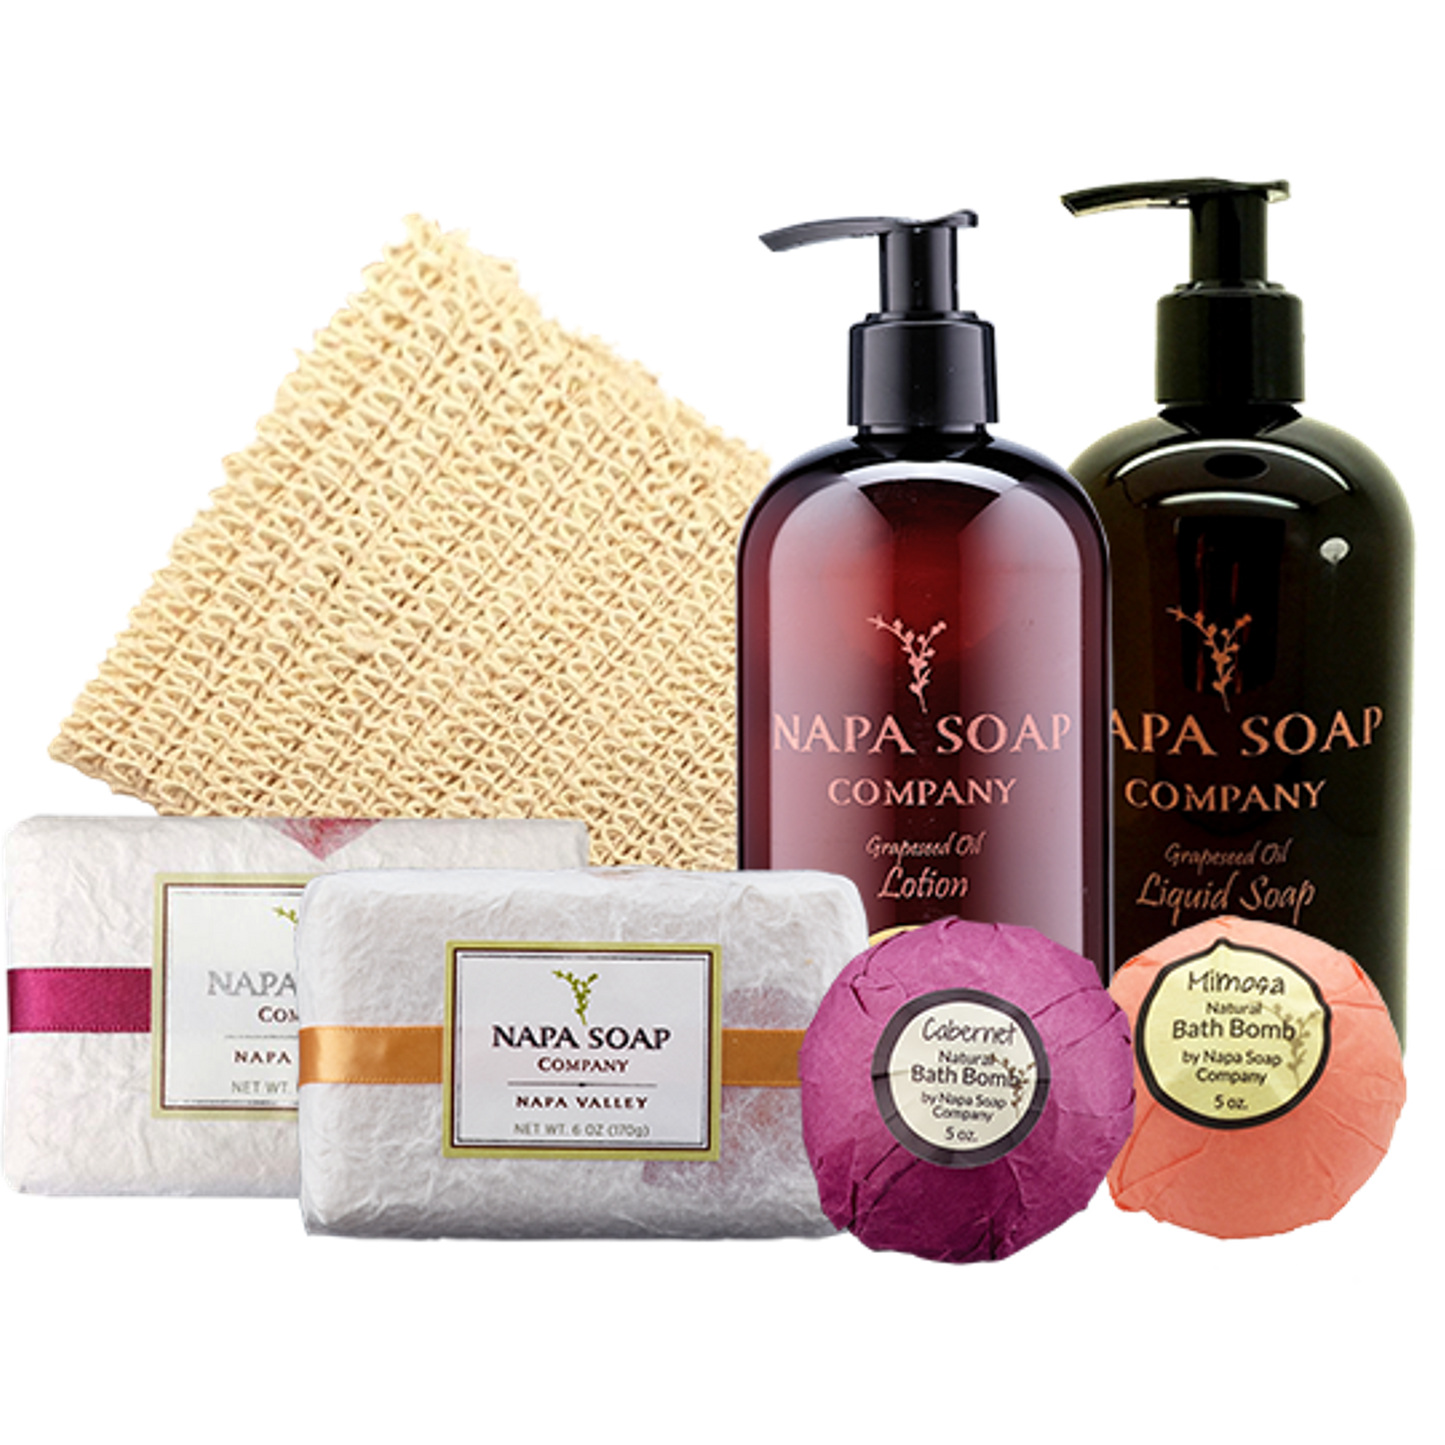 An assortment of Napa Soap Company products, including an assortment of soaps and lotions.